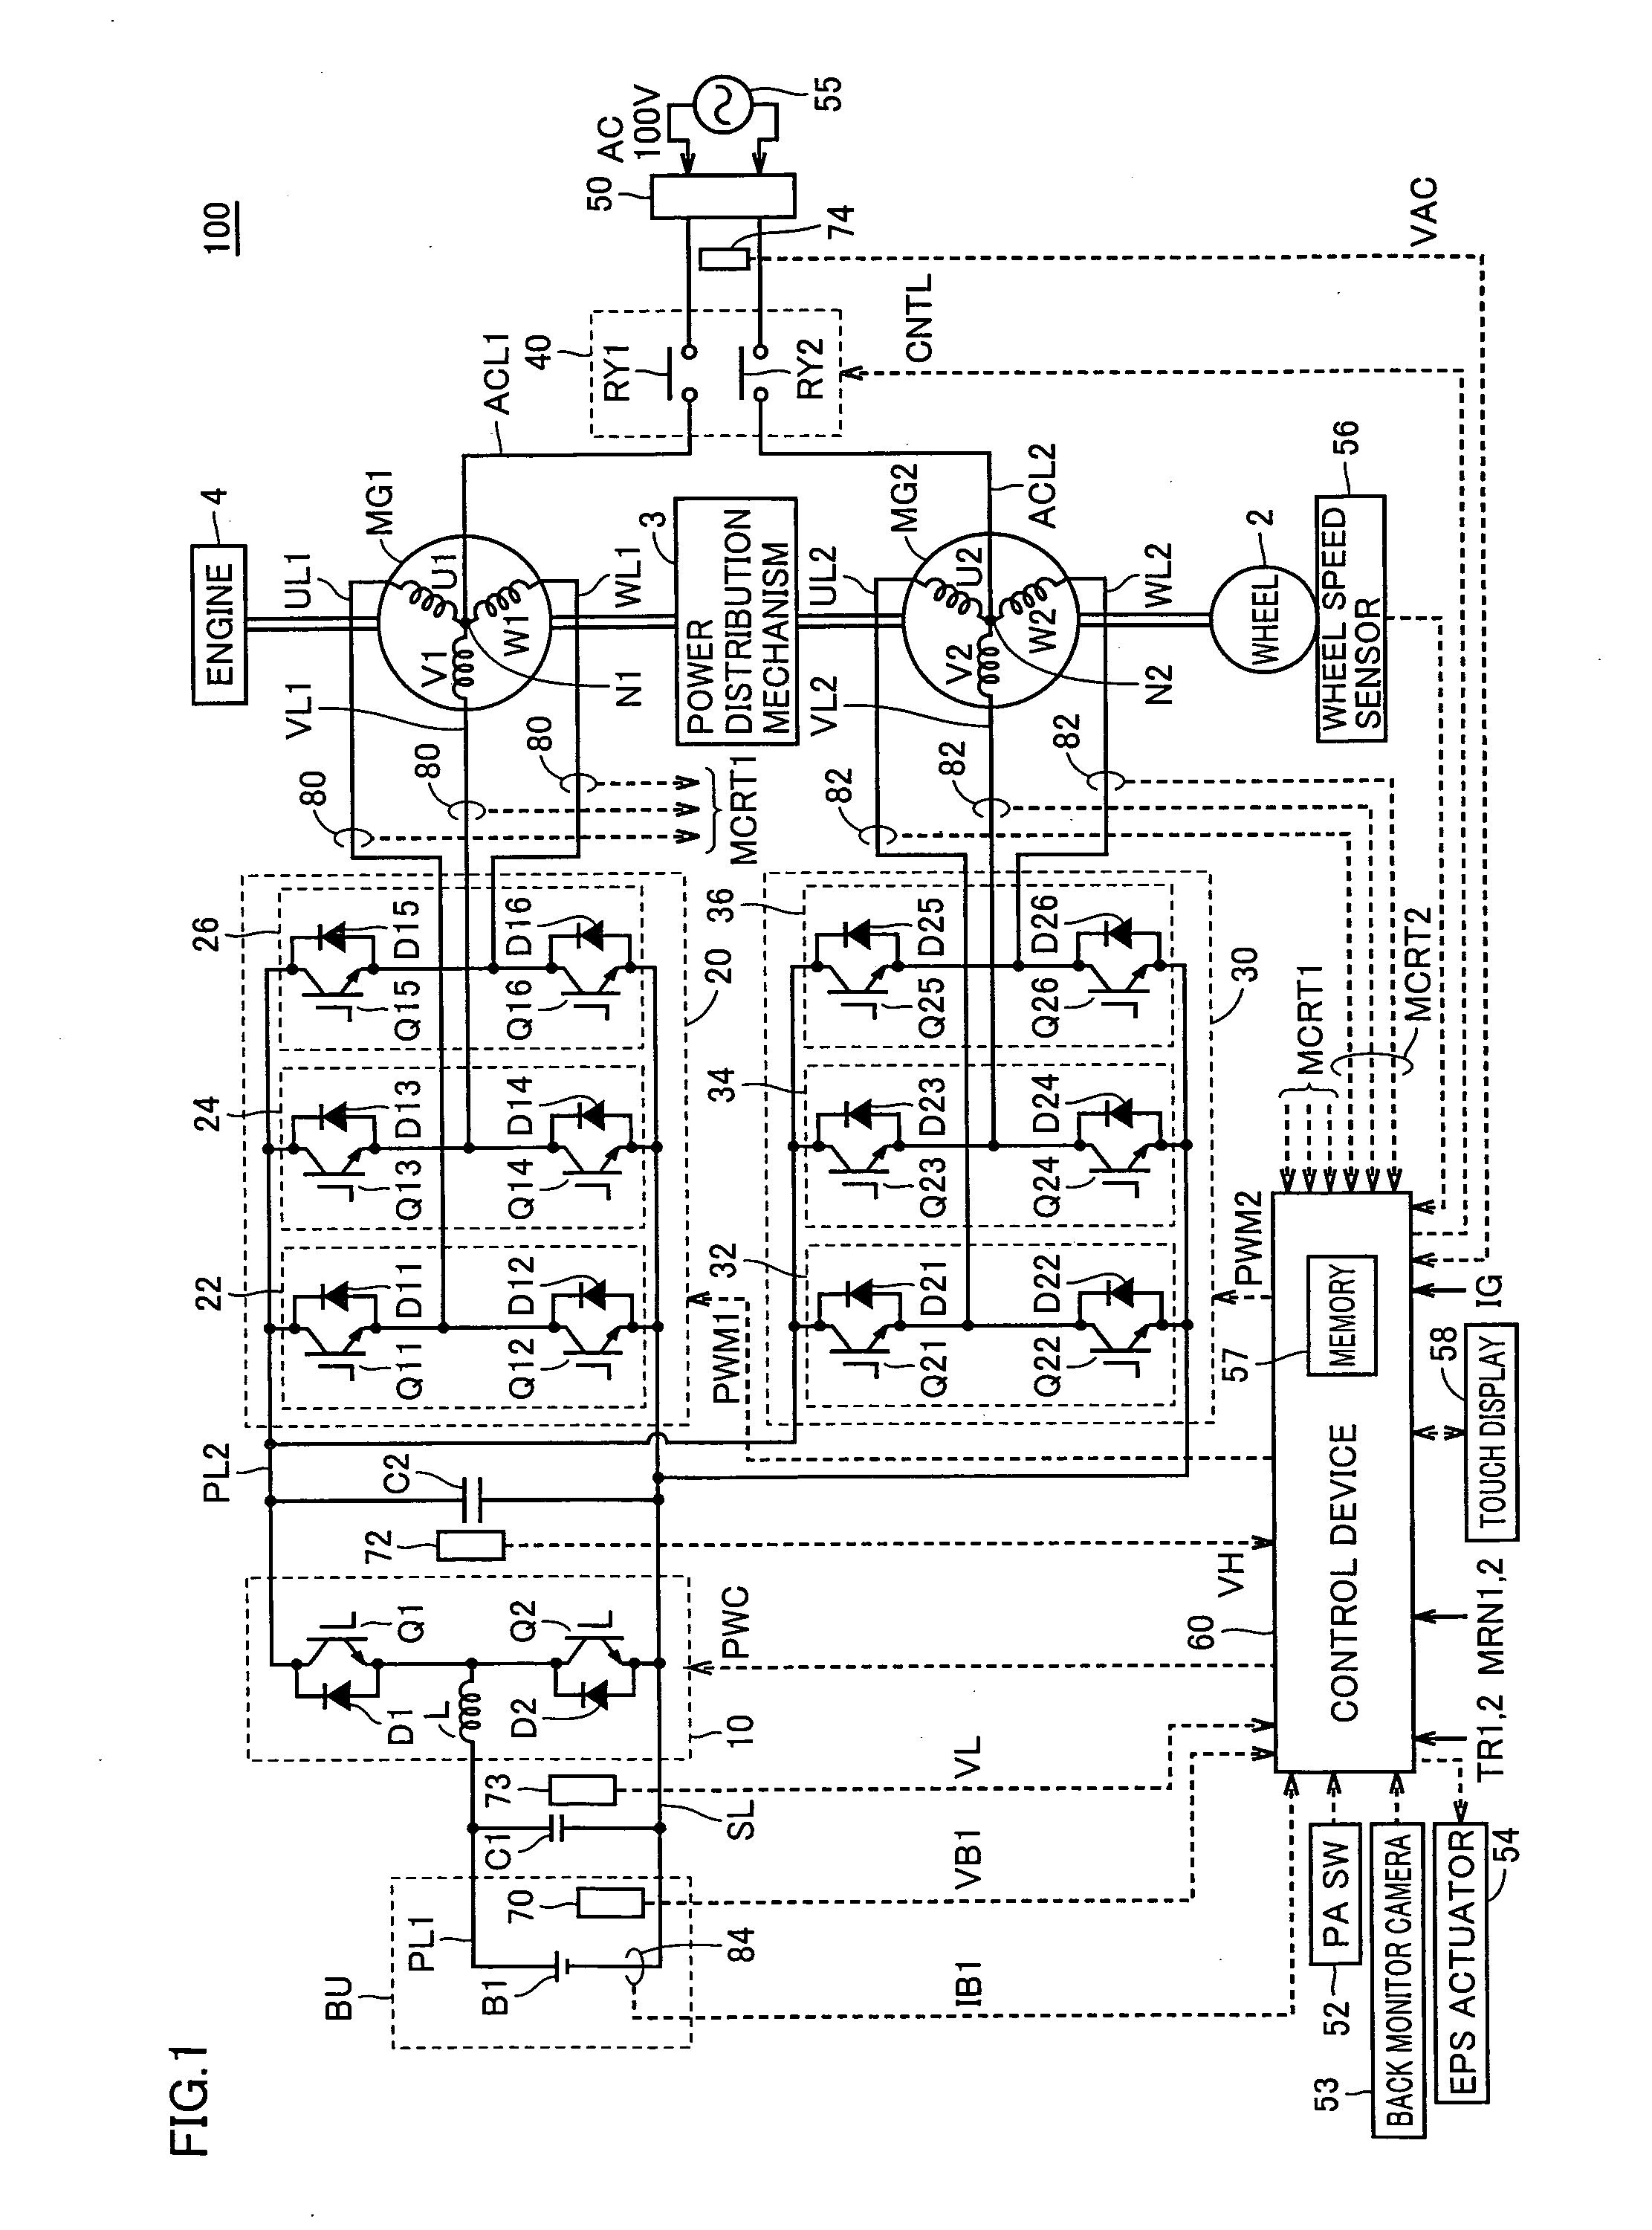 Parking Assist Device and a Method for Electric Power Transmission and Reception Between a Vehicle and a Ground Apparatus